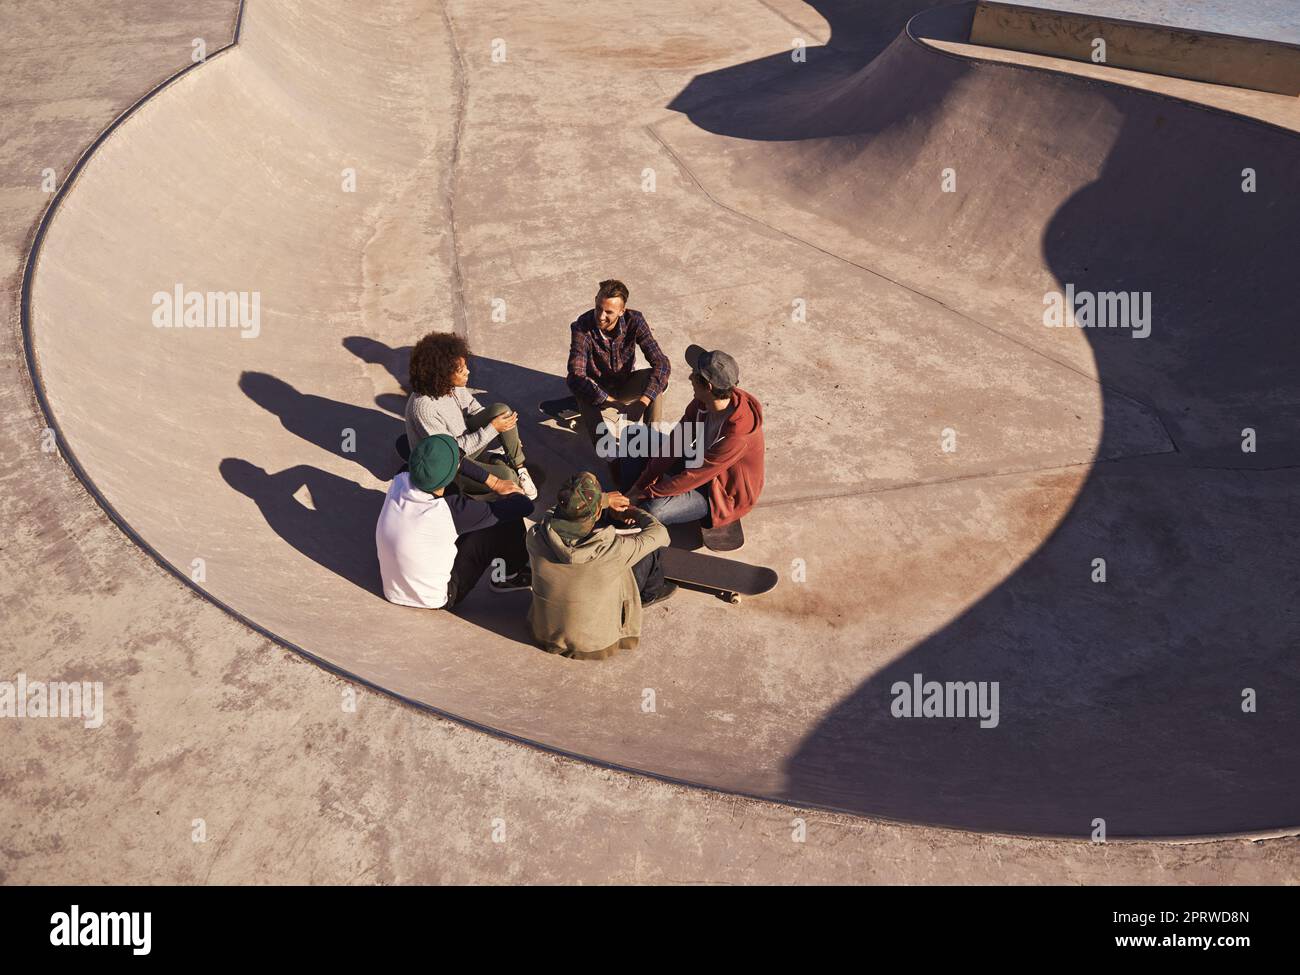 In their natural habitat. a group of friends hanging out in the sun at a skate park. Stock Photo